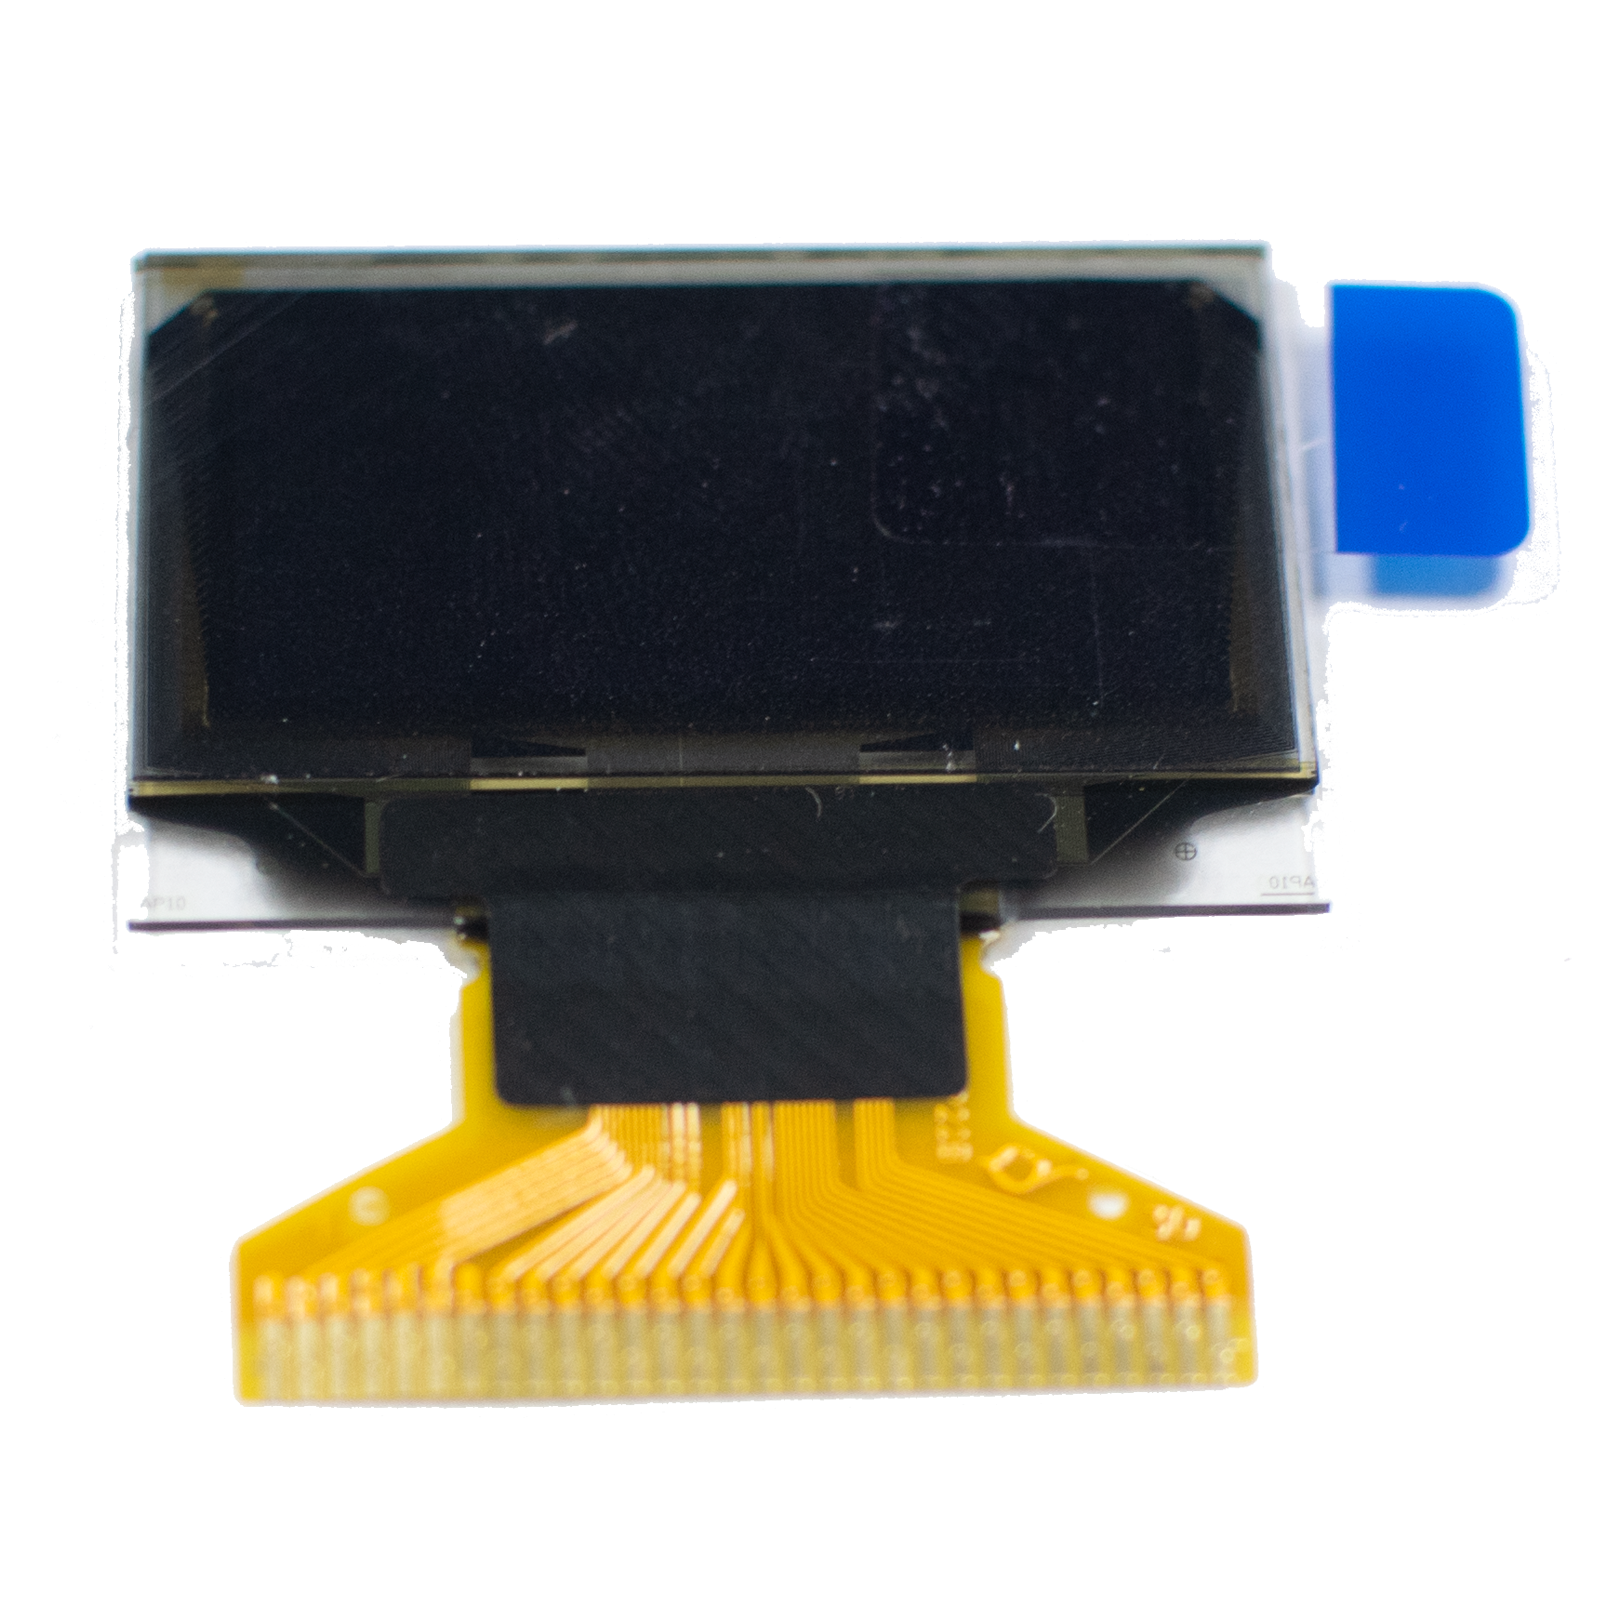 0.96 OLED Display for Arduino (128x64)